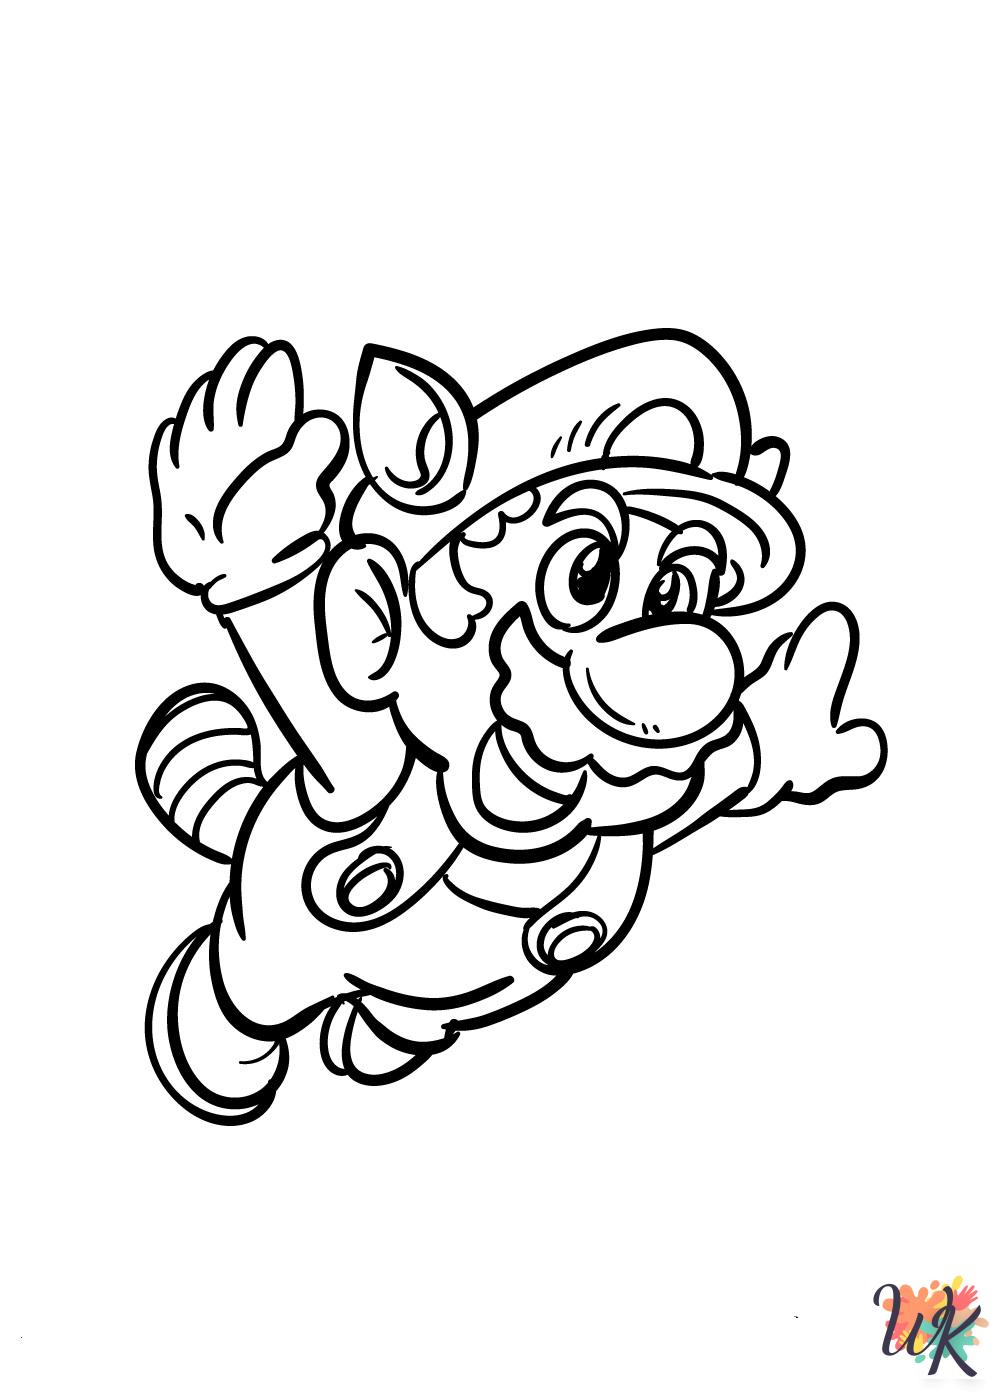 Super Mario Bros coloring pages for adults